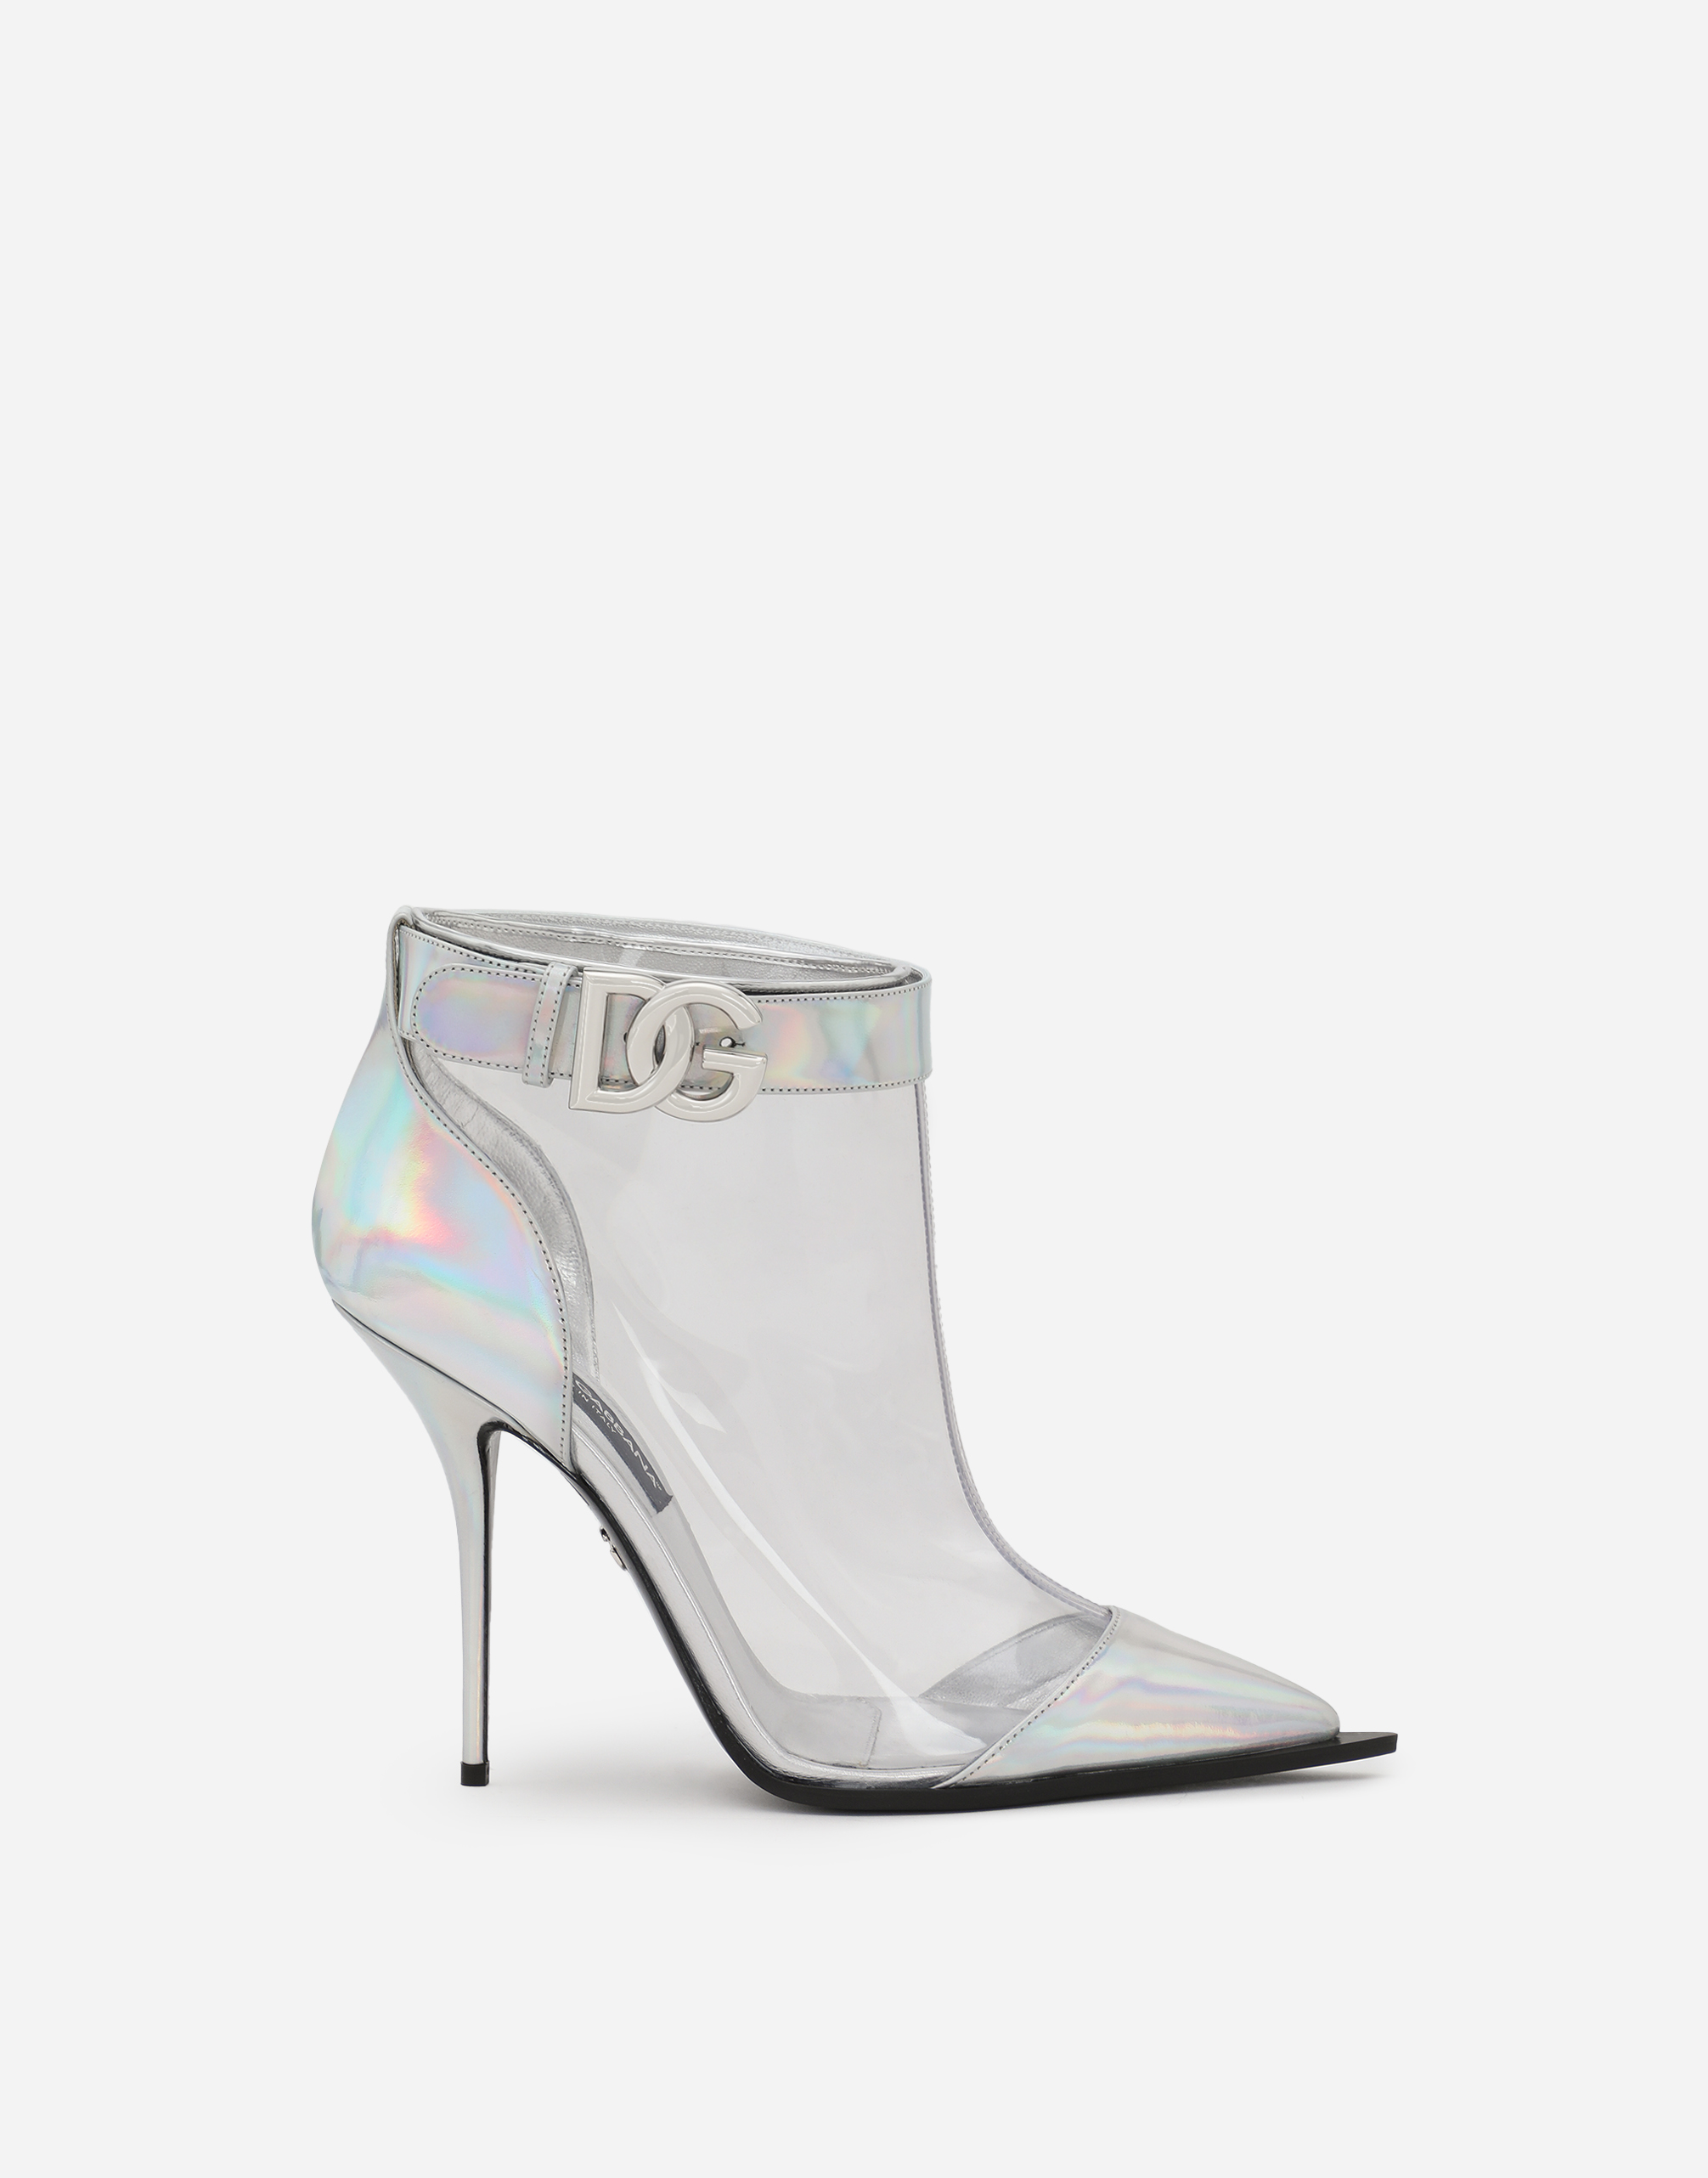 Shimmery PVC ankle boots with DG logo in Multicolor